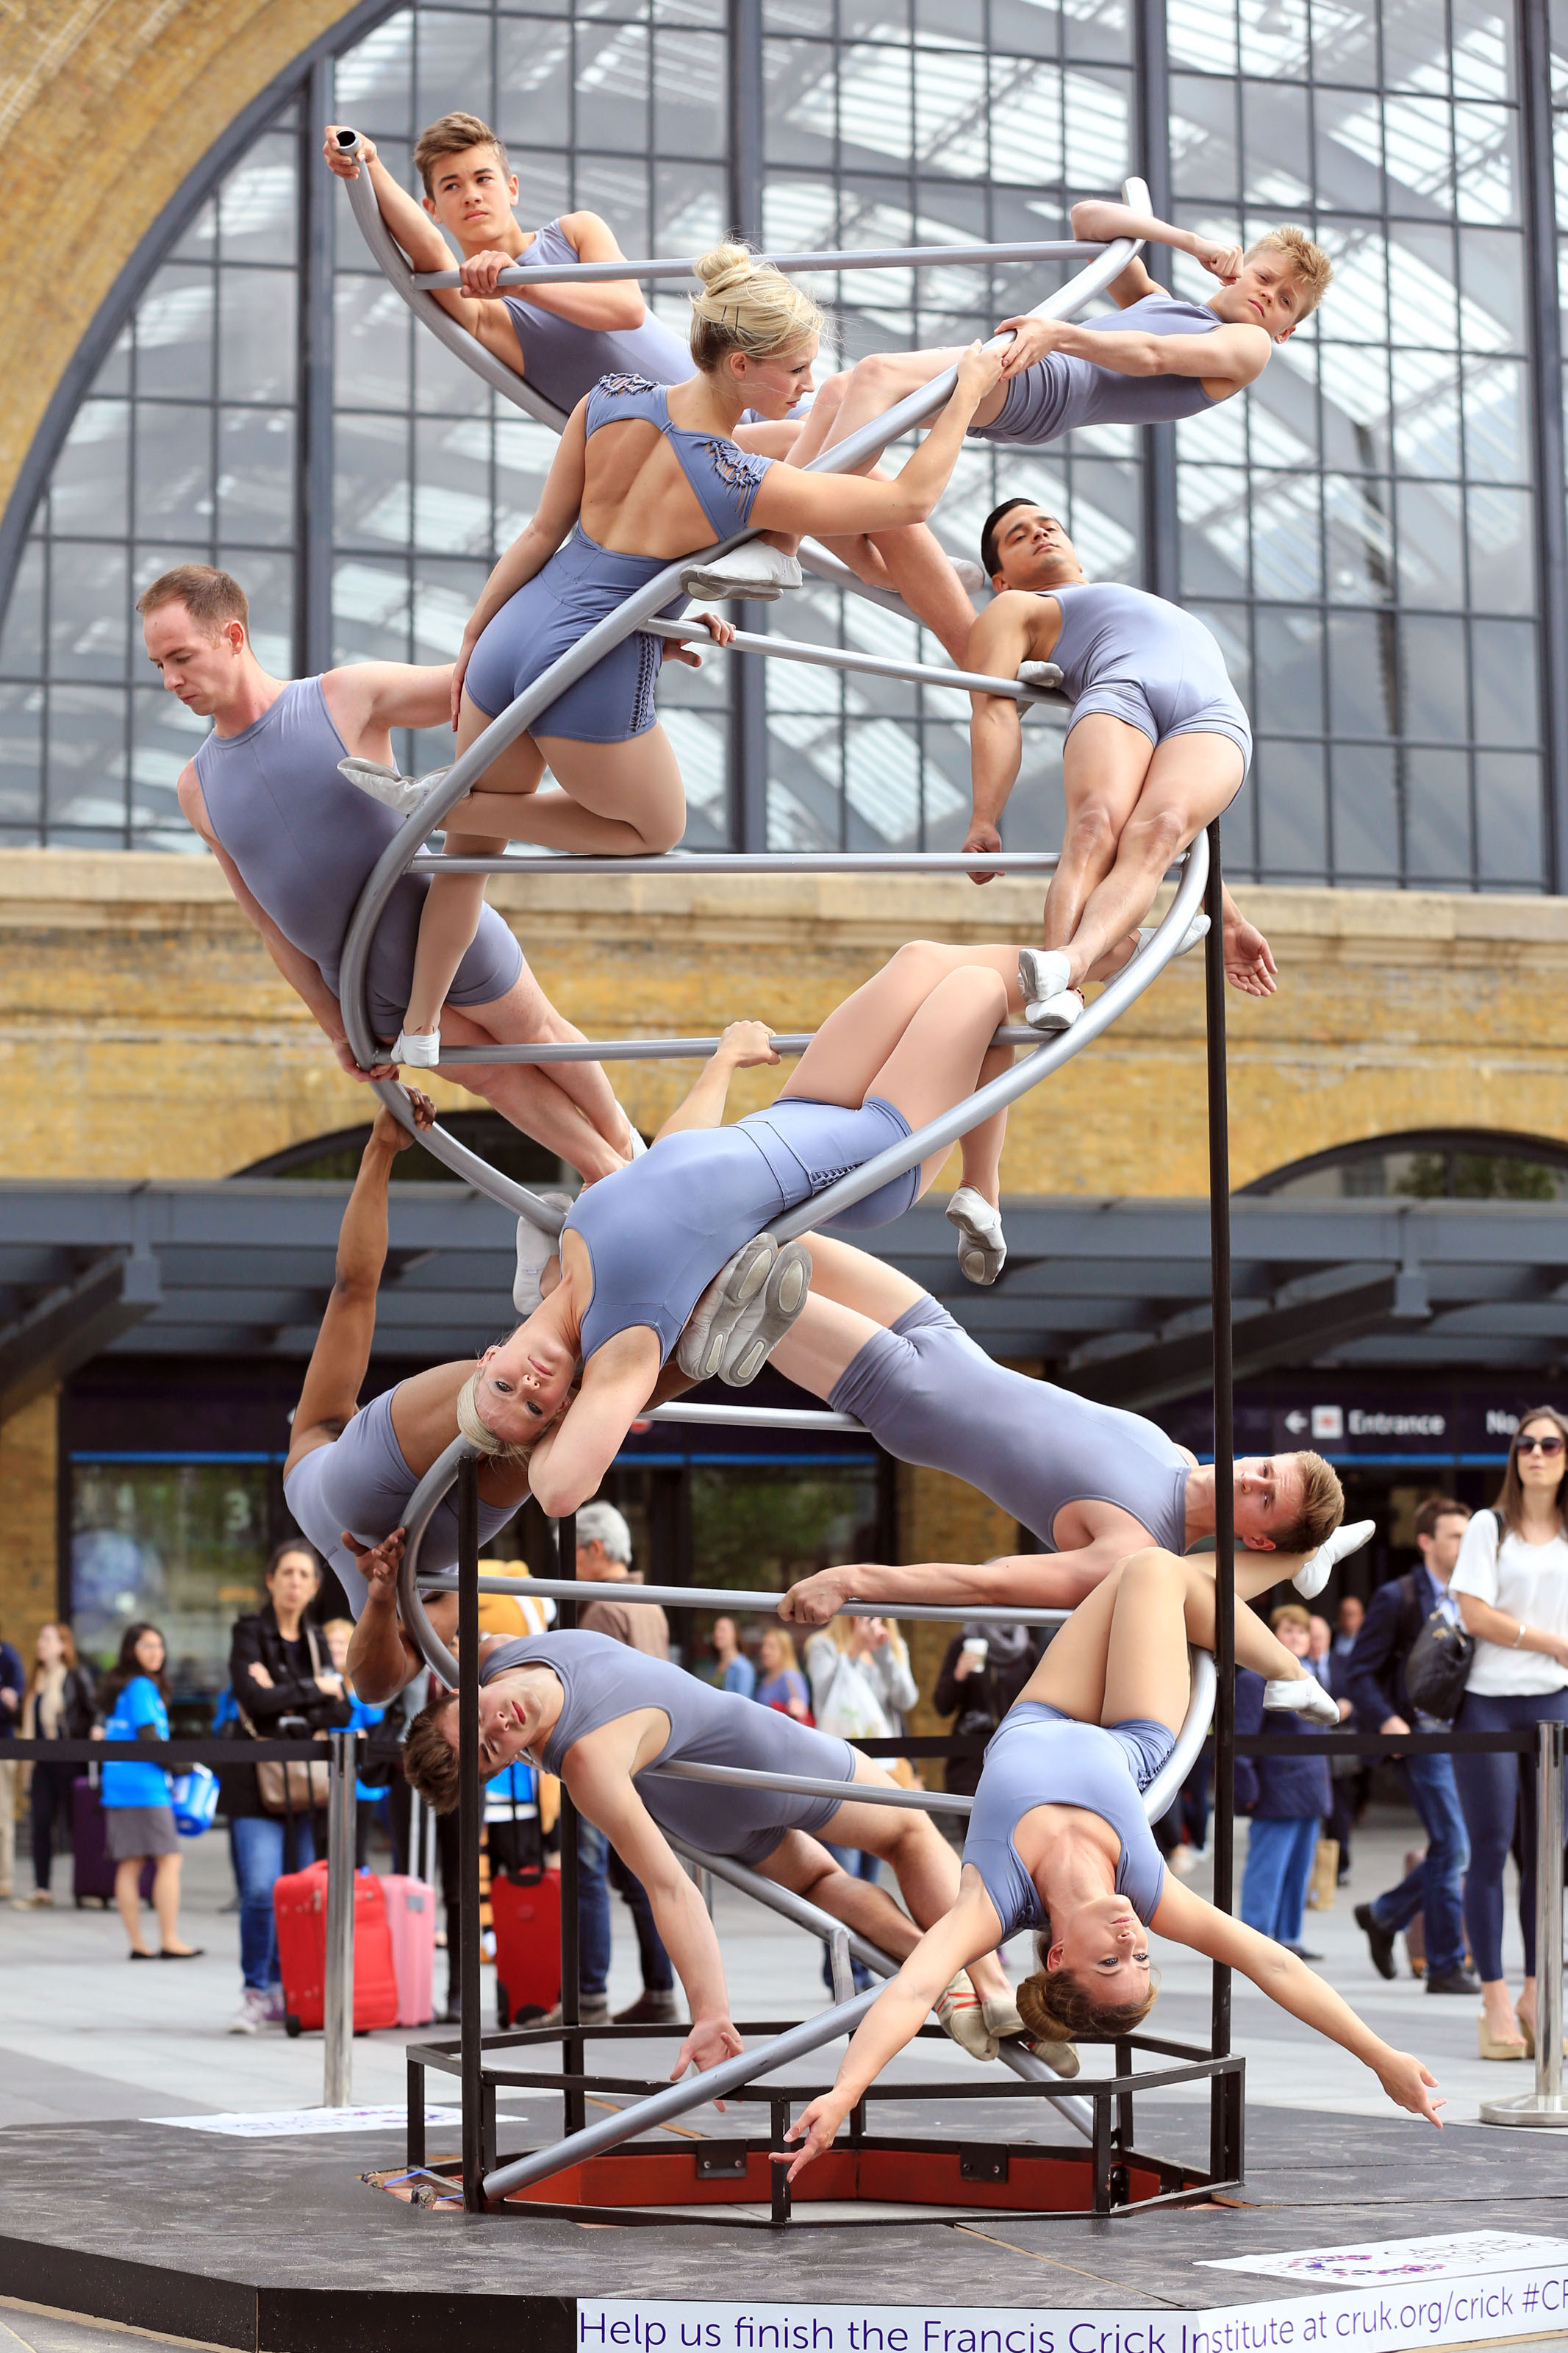 Cancer Research acrobats